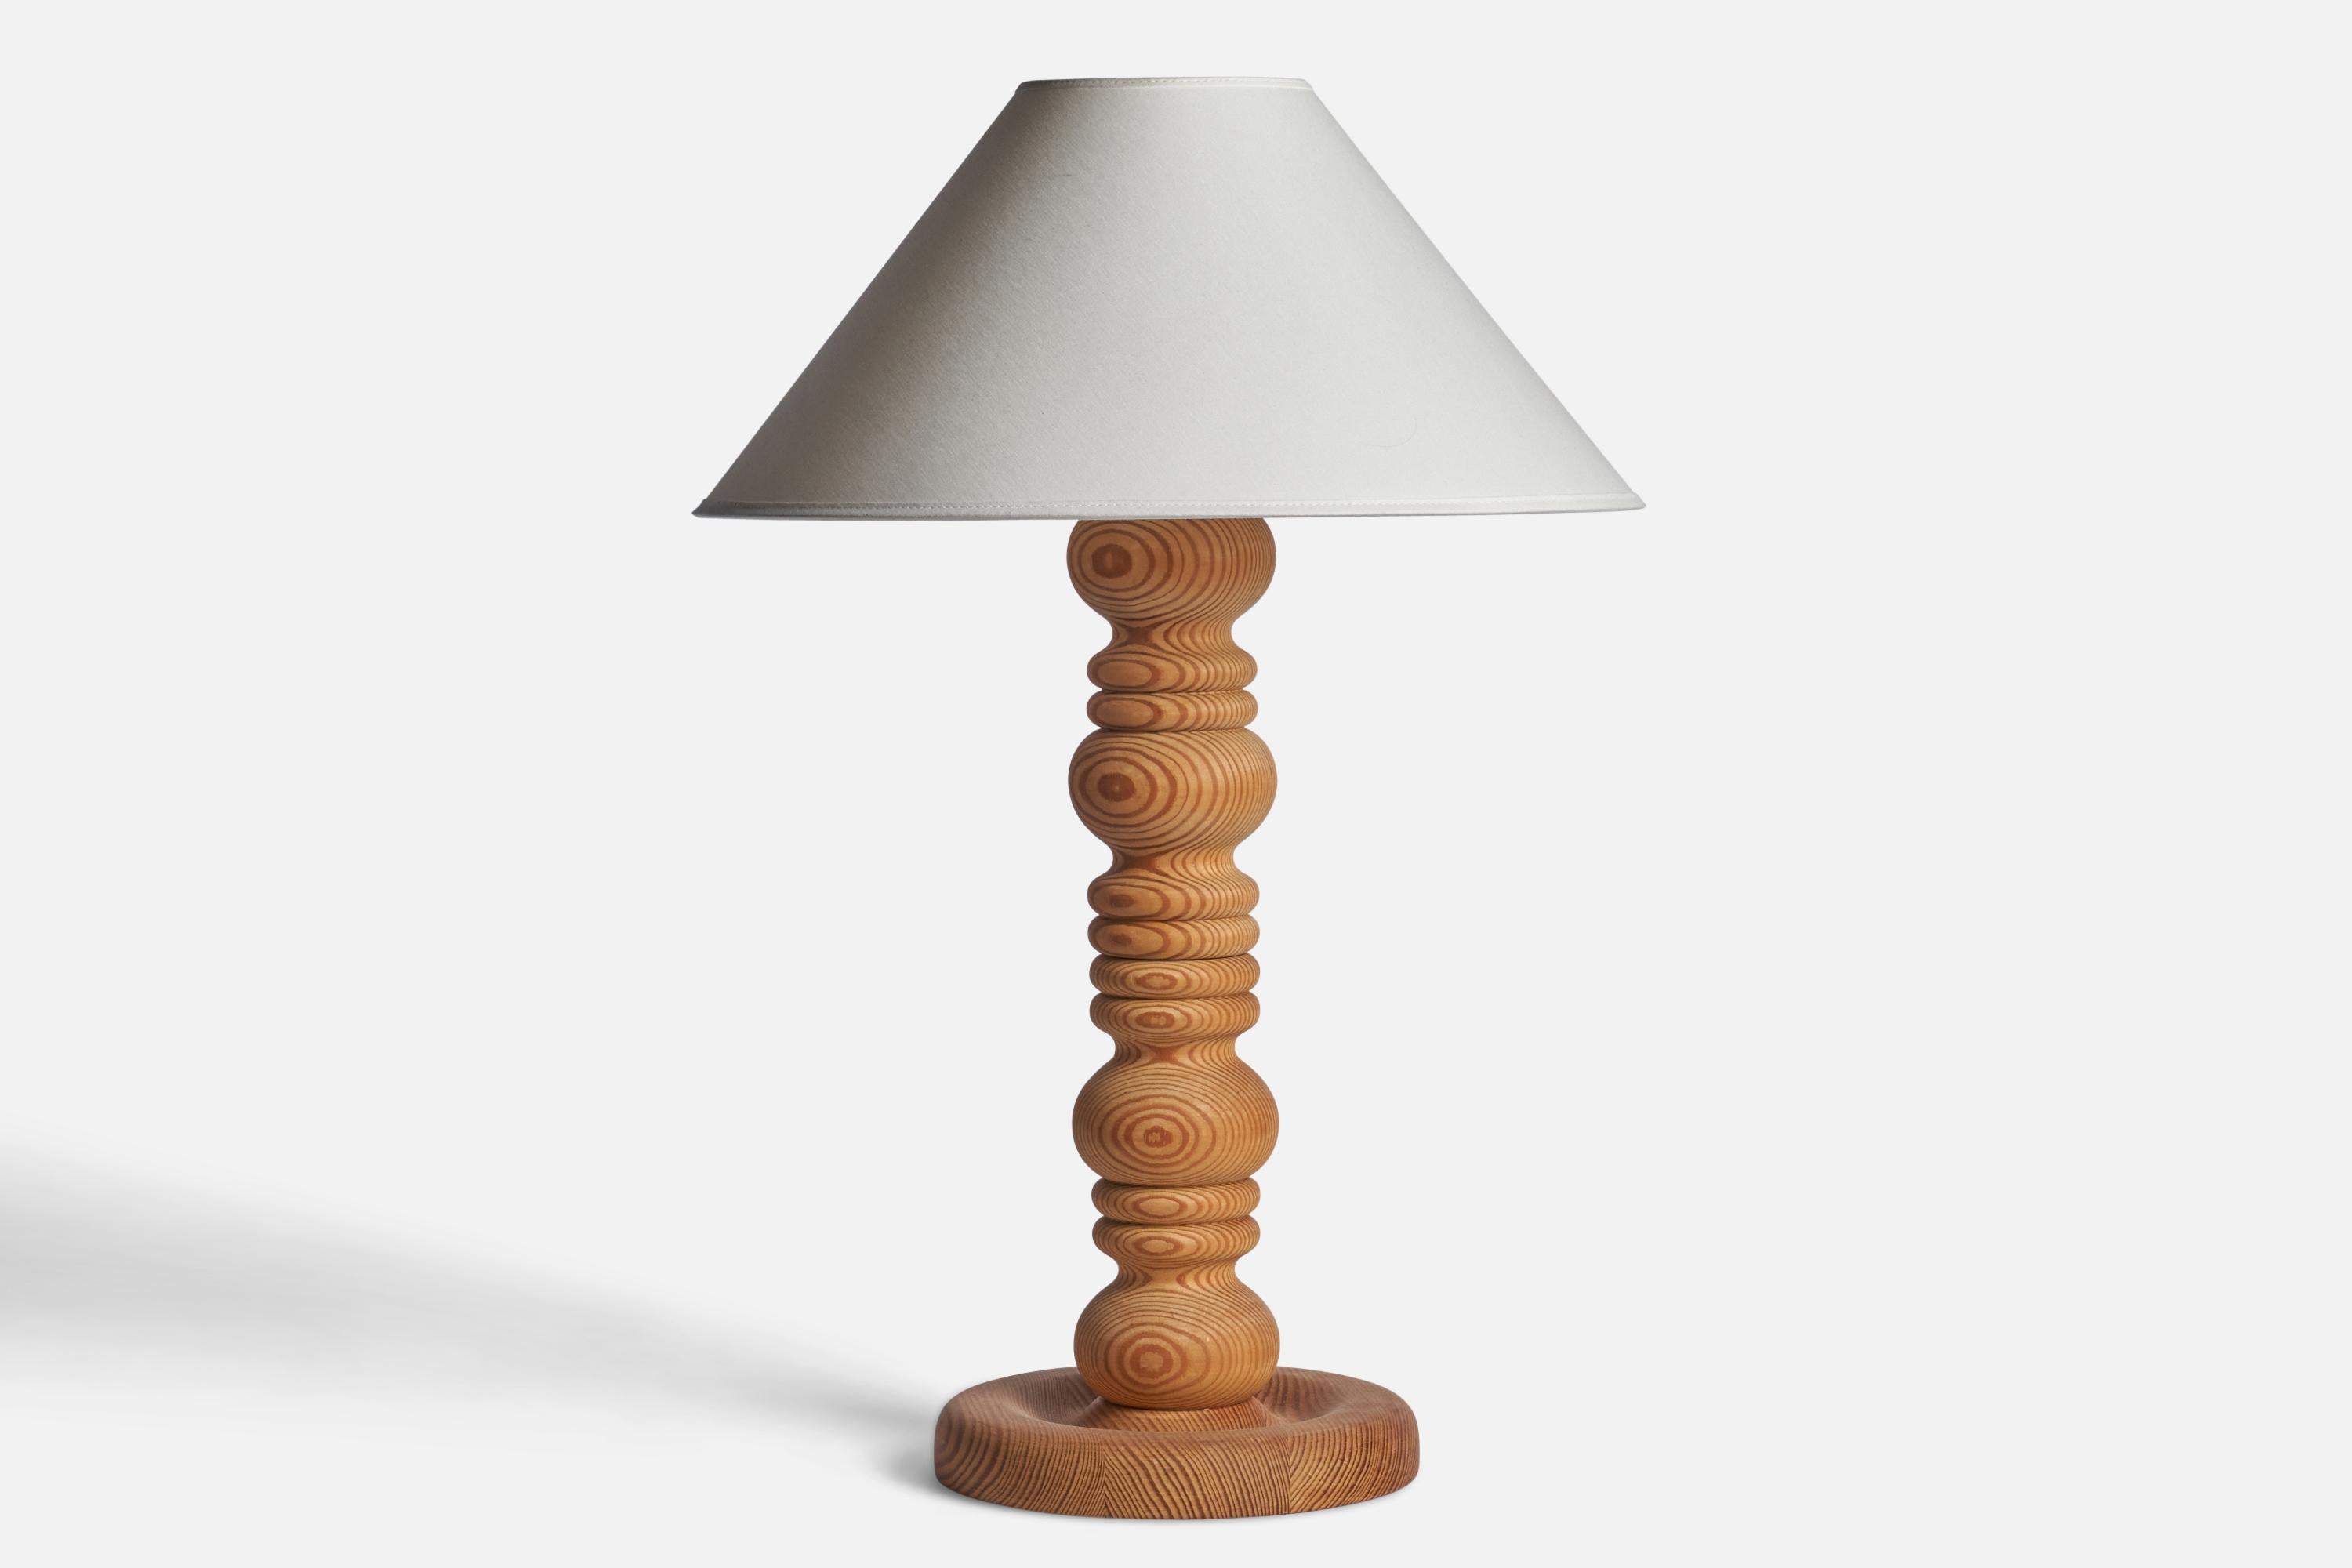 A sizeable pine table lamp designed and produced in Sweden, 1970s.

Dimensions of Lamp (inches): 18.5 H x 8.25” Diameter
Dimensions of Shade (inches): 4.5” Top Diameter x 16” Bottom Diameter x 7.25” H
Dimensions of Lamp with Shade (inches): 23.75” H